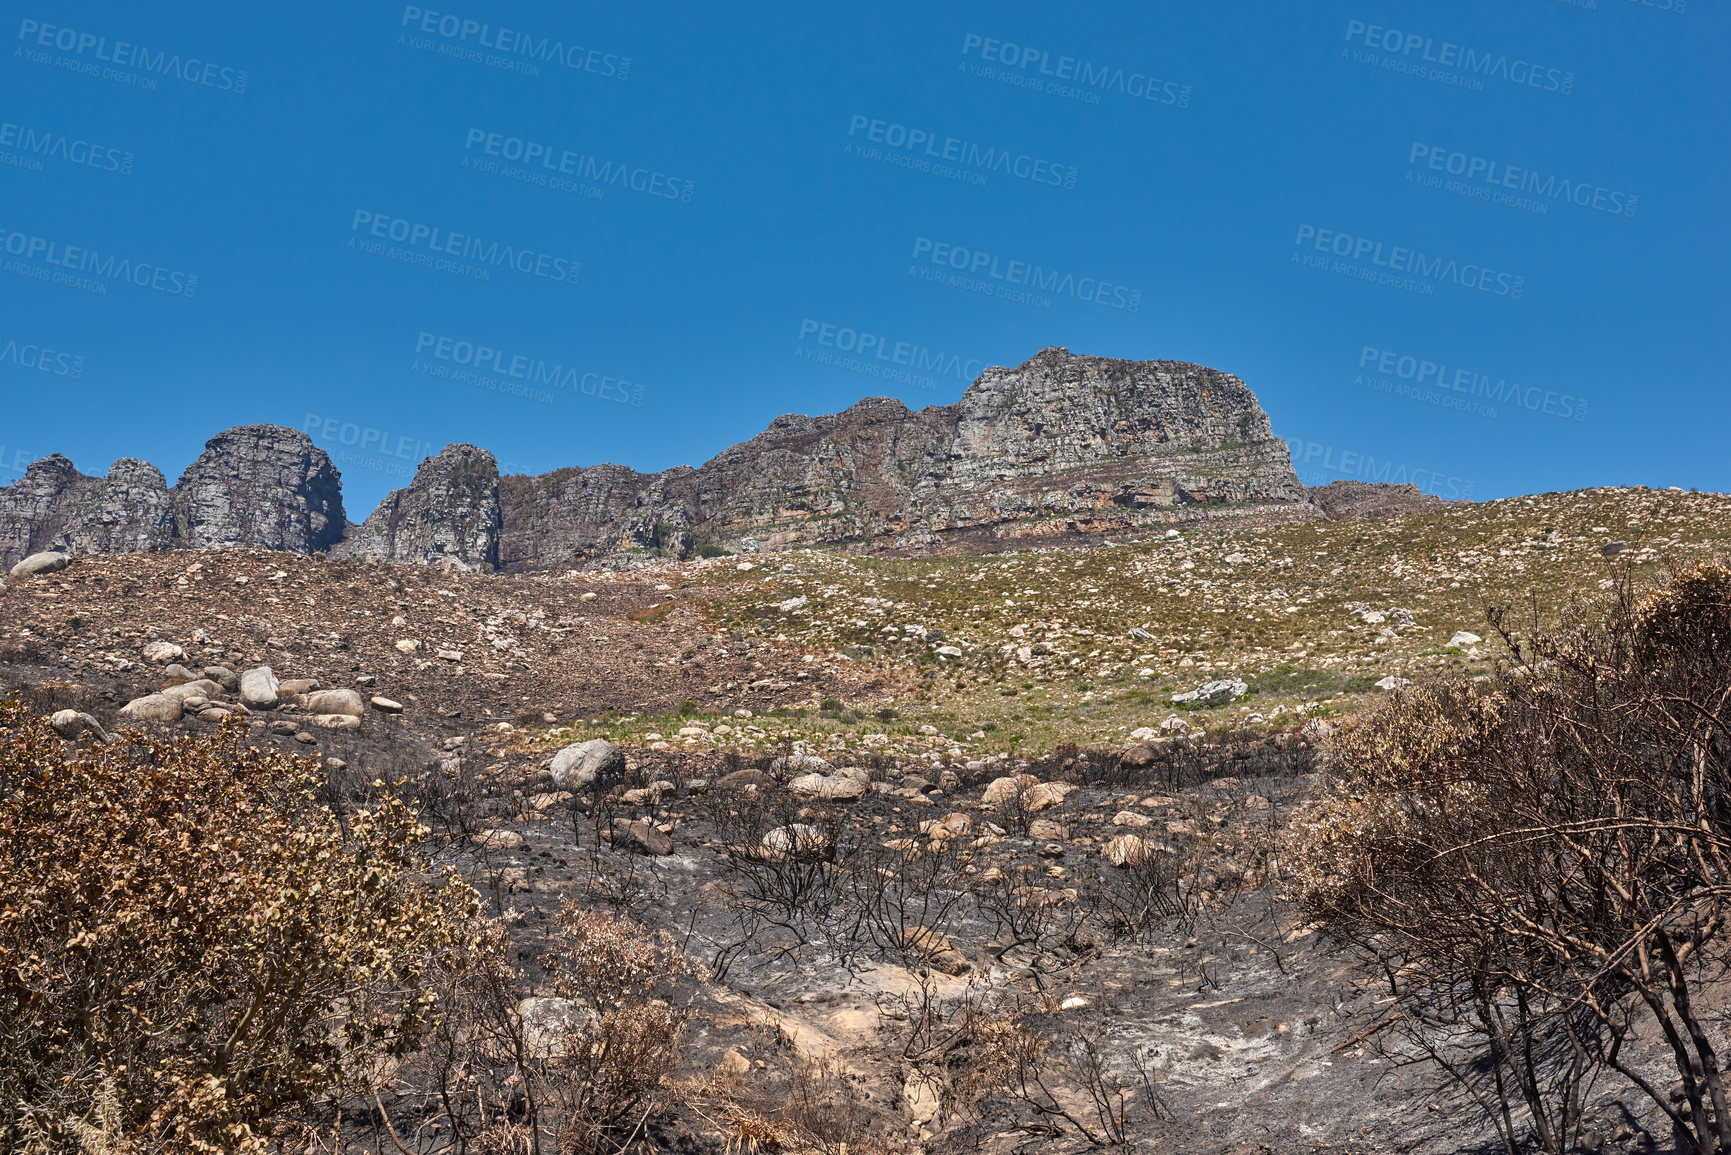 Buy stock photo Landscape of burnt trees after a bushfire on Table Mountain, Cape Town, South Africa. Outcrops of a mountain against blue sky with dead bushes. Black scorched tree trunks, the aftermath of wildfires